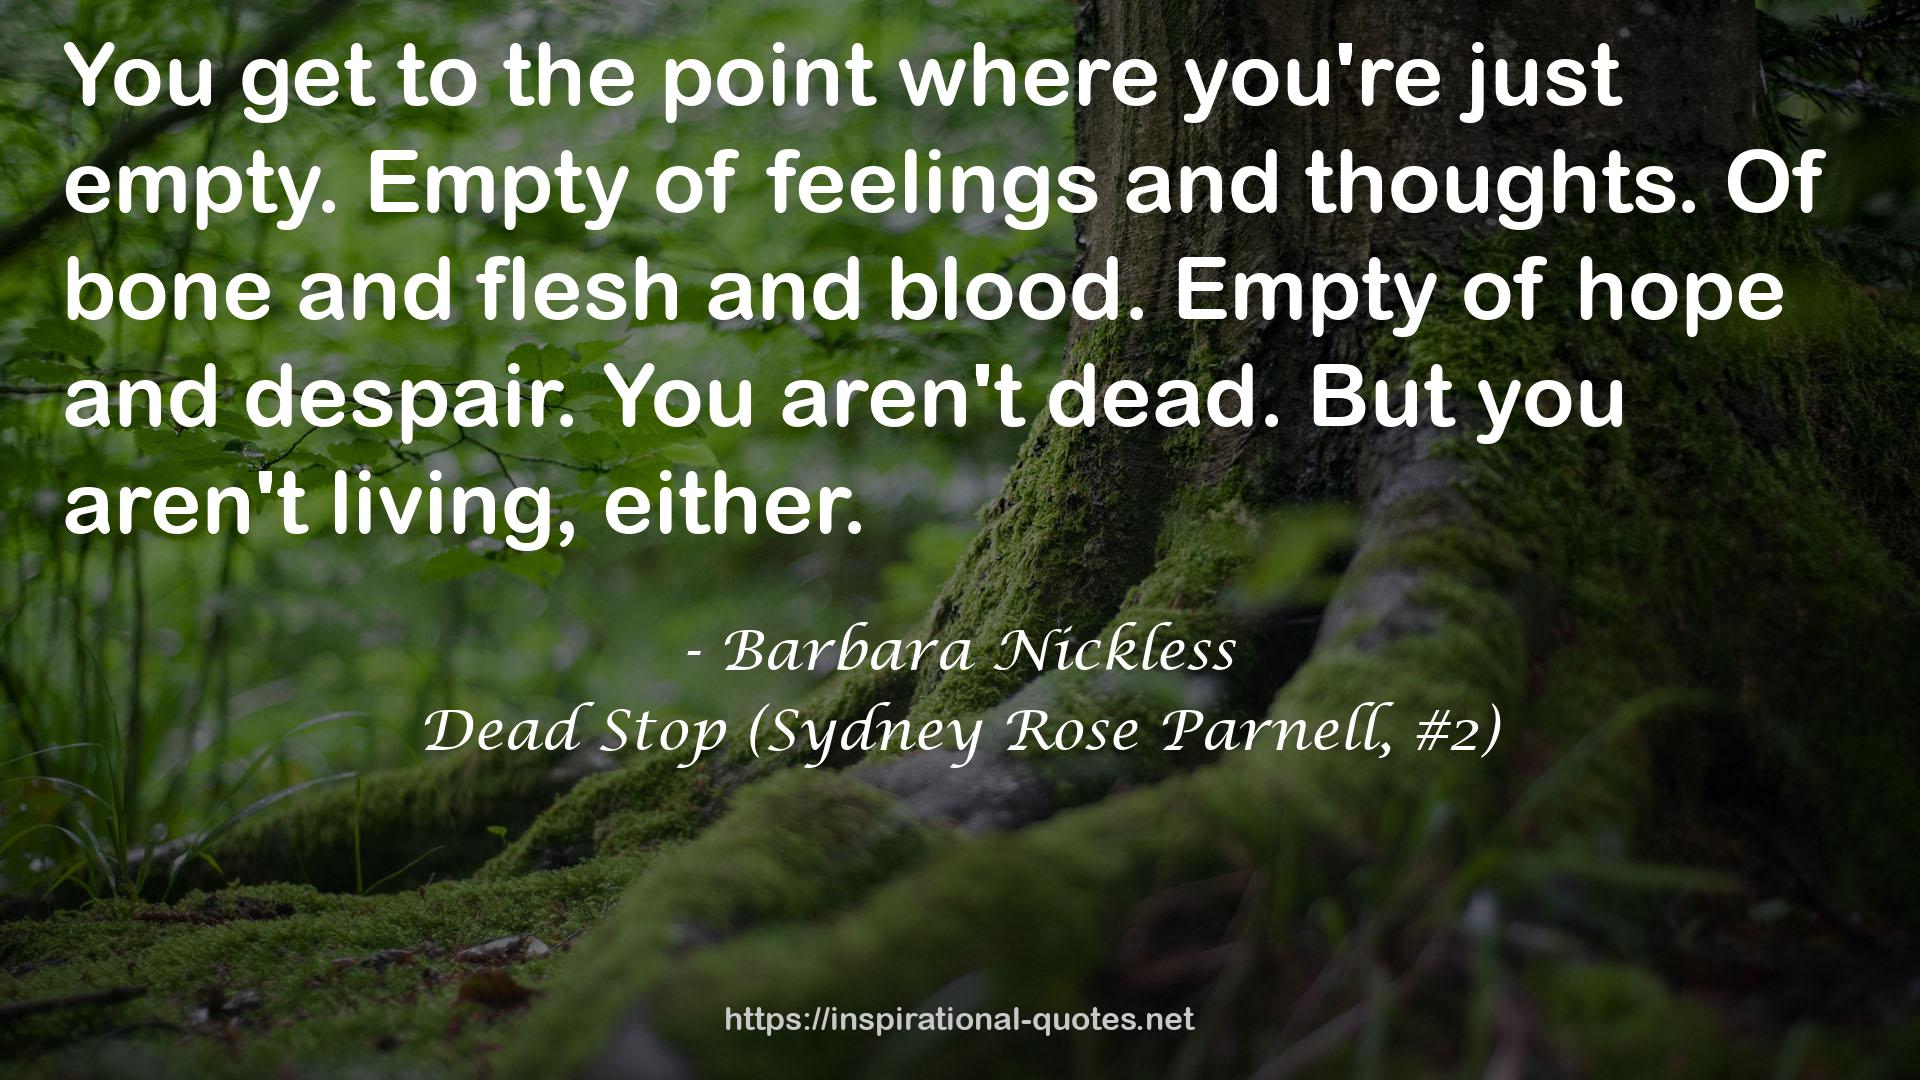 Dead Stop (Sydney Rose Parnell, #2) QUOTES